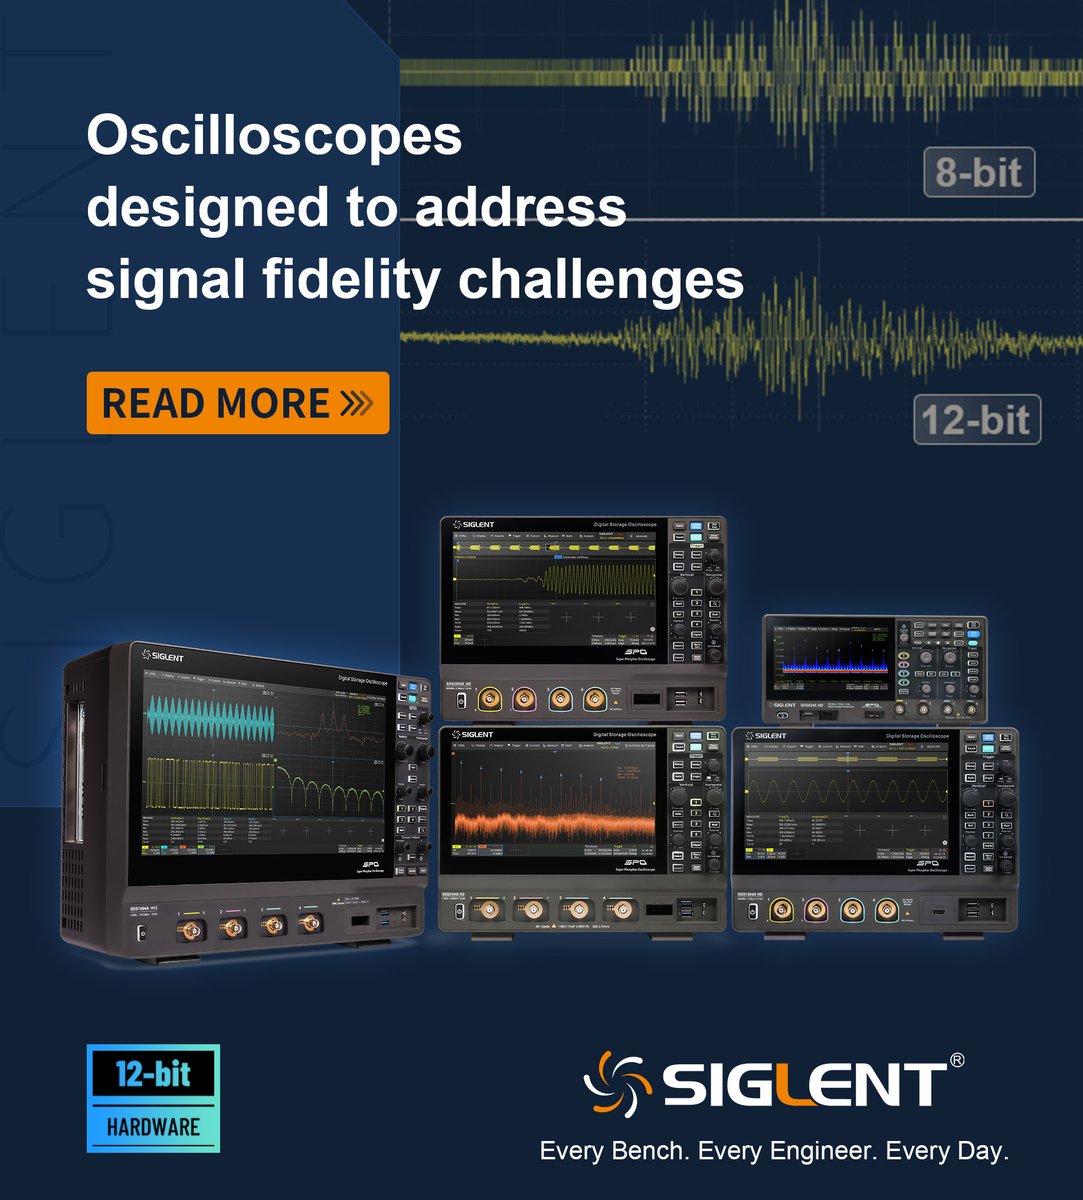 Engineers constantly face challenges associated with signal fidelity. Finding the best tools for analyzing signal fidelity is crucial for efficient problem-solving. SIGLENT's HD oscilloscopes are designed for signal fidelity from 70 MHz to 4 GHz. Read now: bit.ly/3TfL1Cz